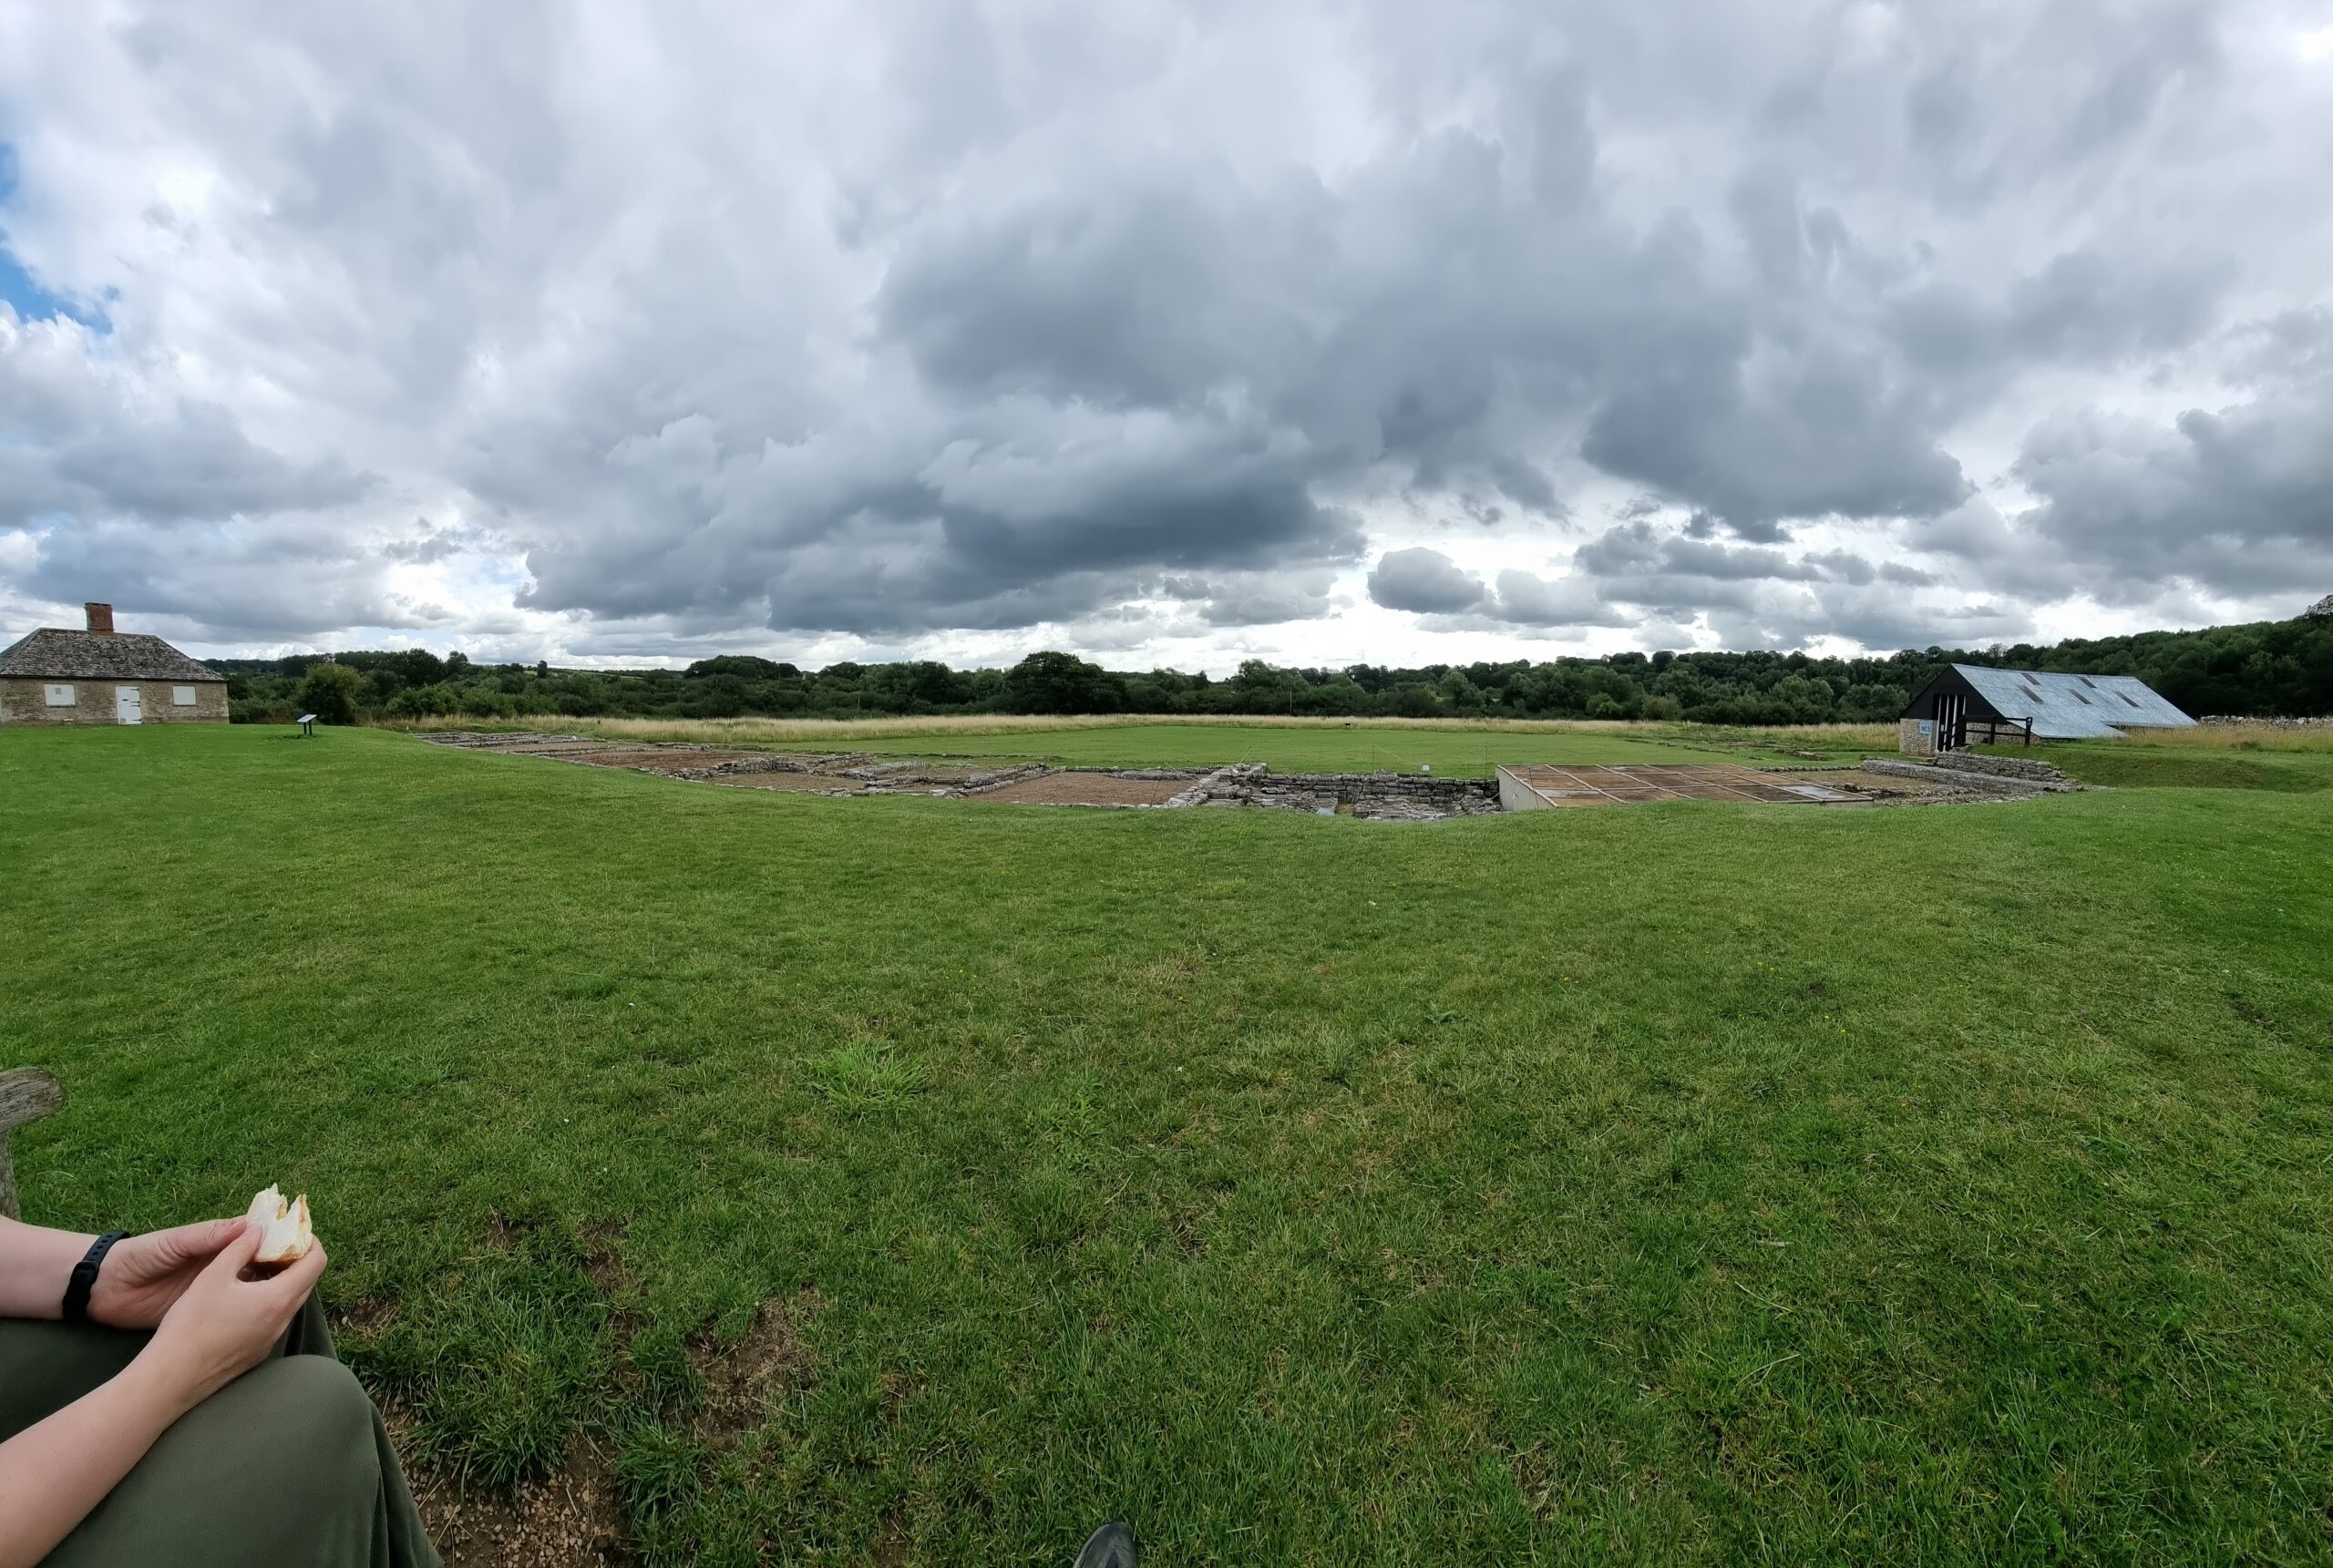 Panoramic photo showing a field containing the remains of a Roman villa in West Oxfordshire, under grey skies. The walls are barely visible in this wide shot.